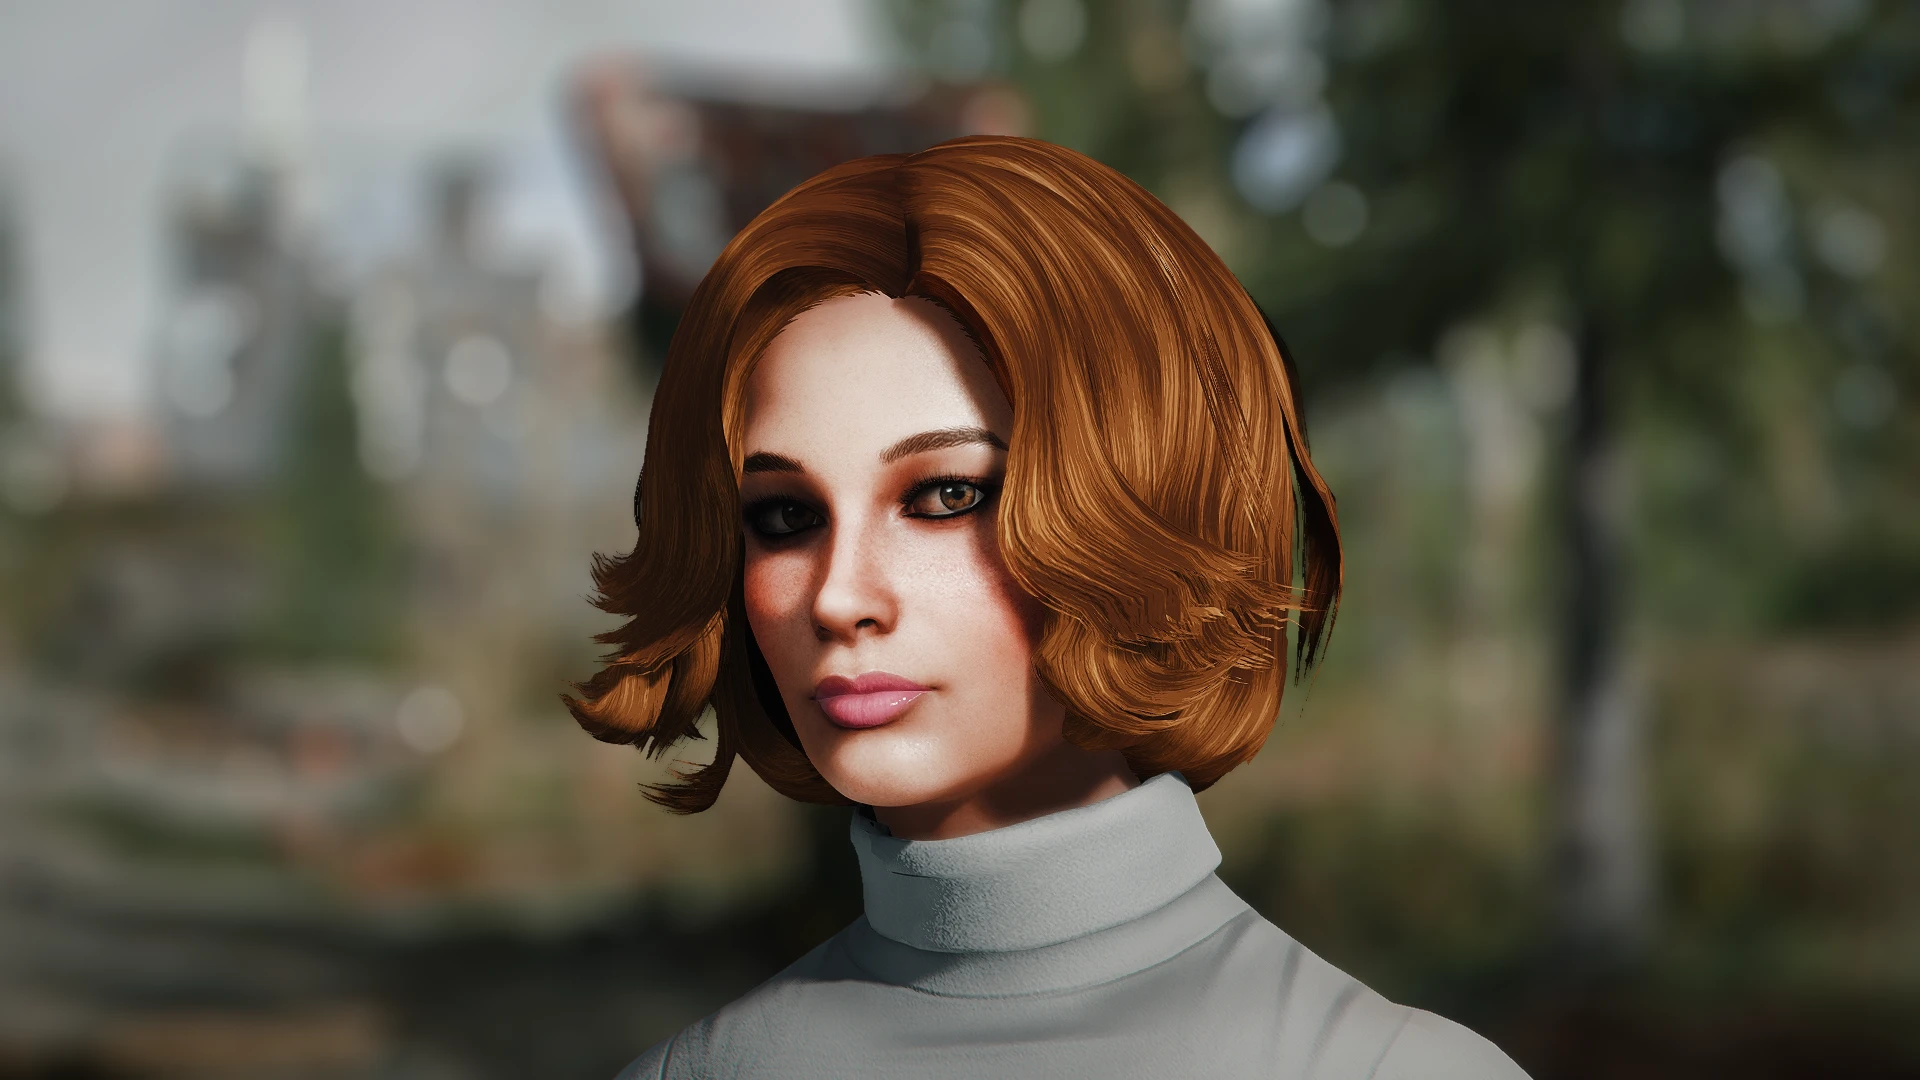 Imogen at Fallout 4 Nexus - Mods and community